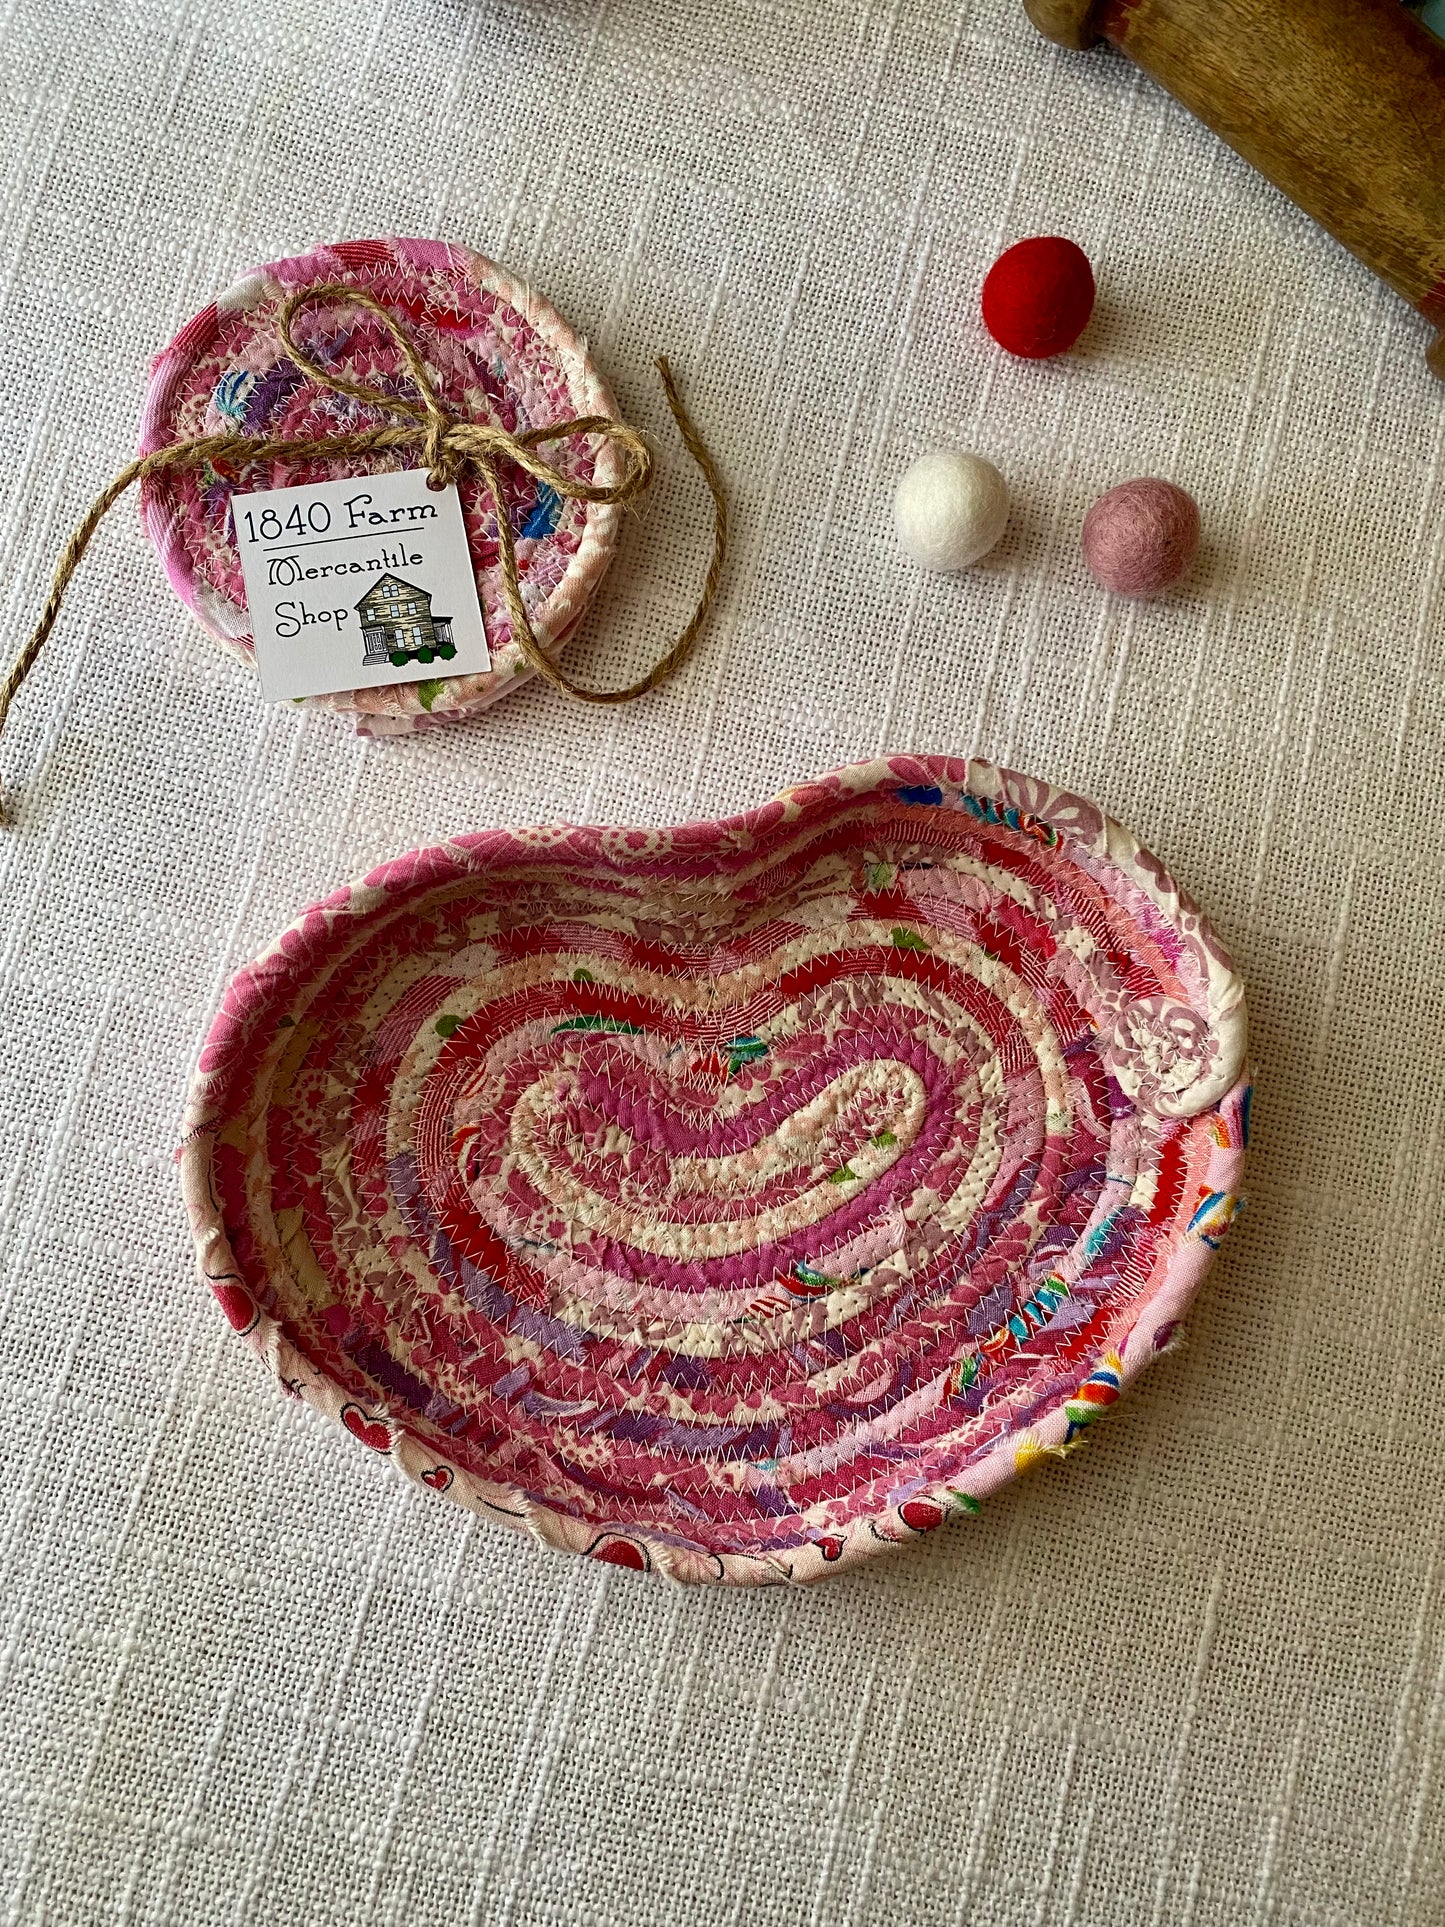 Medium Heart Shaped Saucer Style Trivet and Coasters